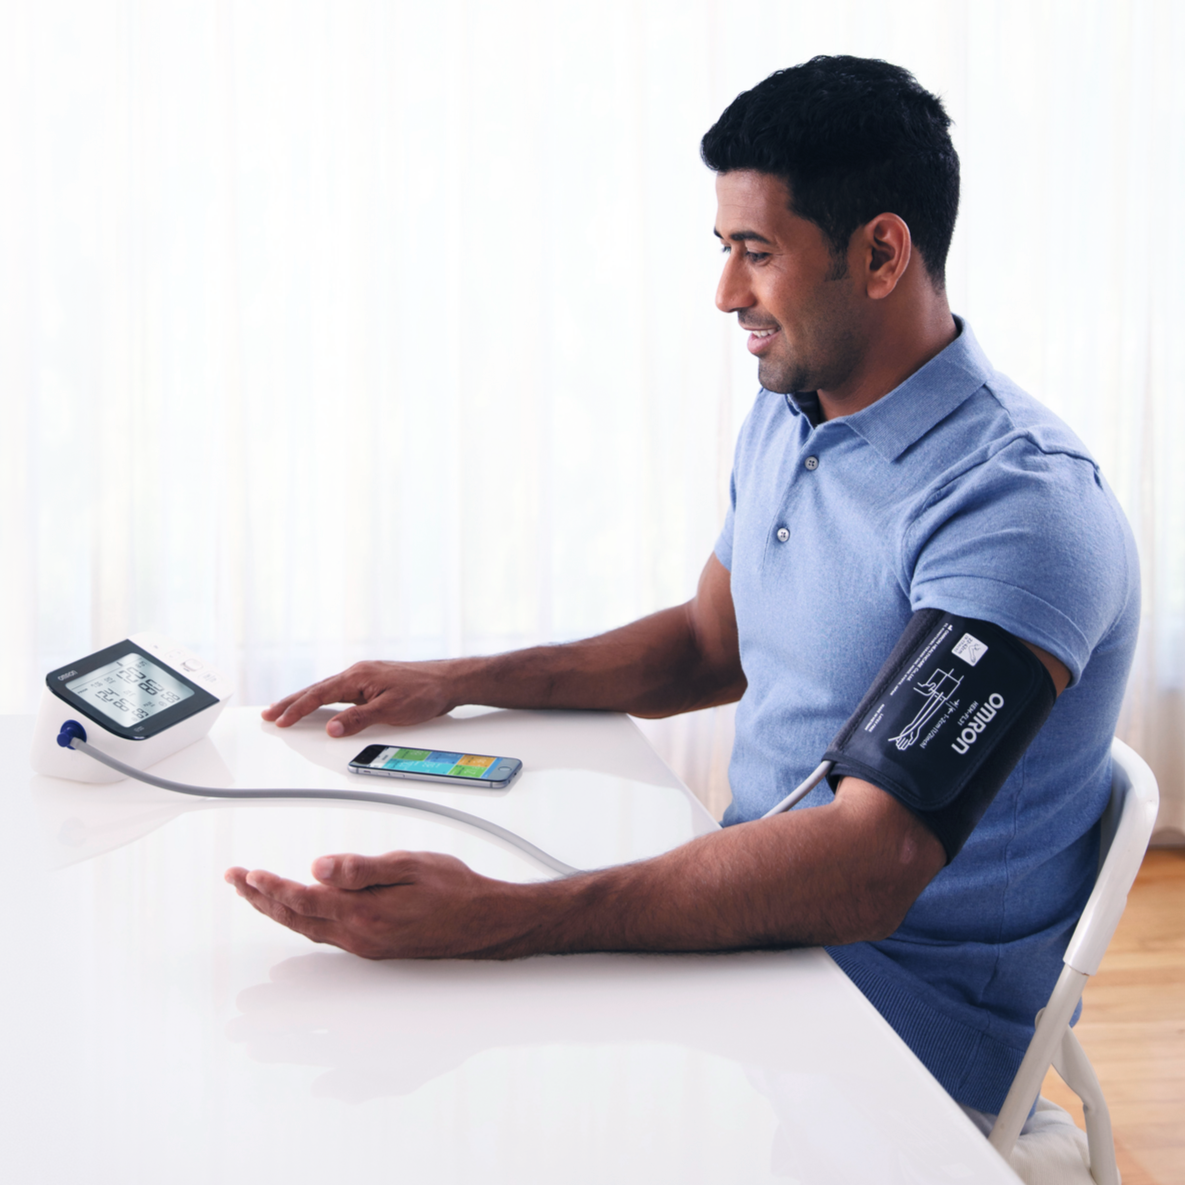 Tips on Getting Accurate Blood Pressure Reading with Cupper Arm Cuff  Monitors, by Omron Healthcare